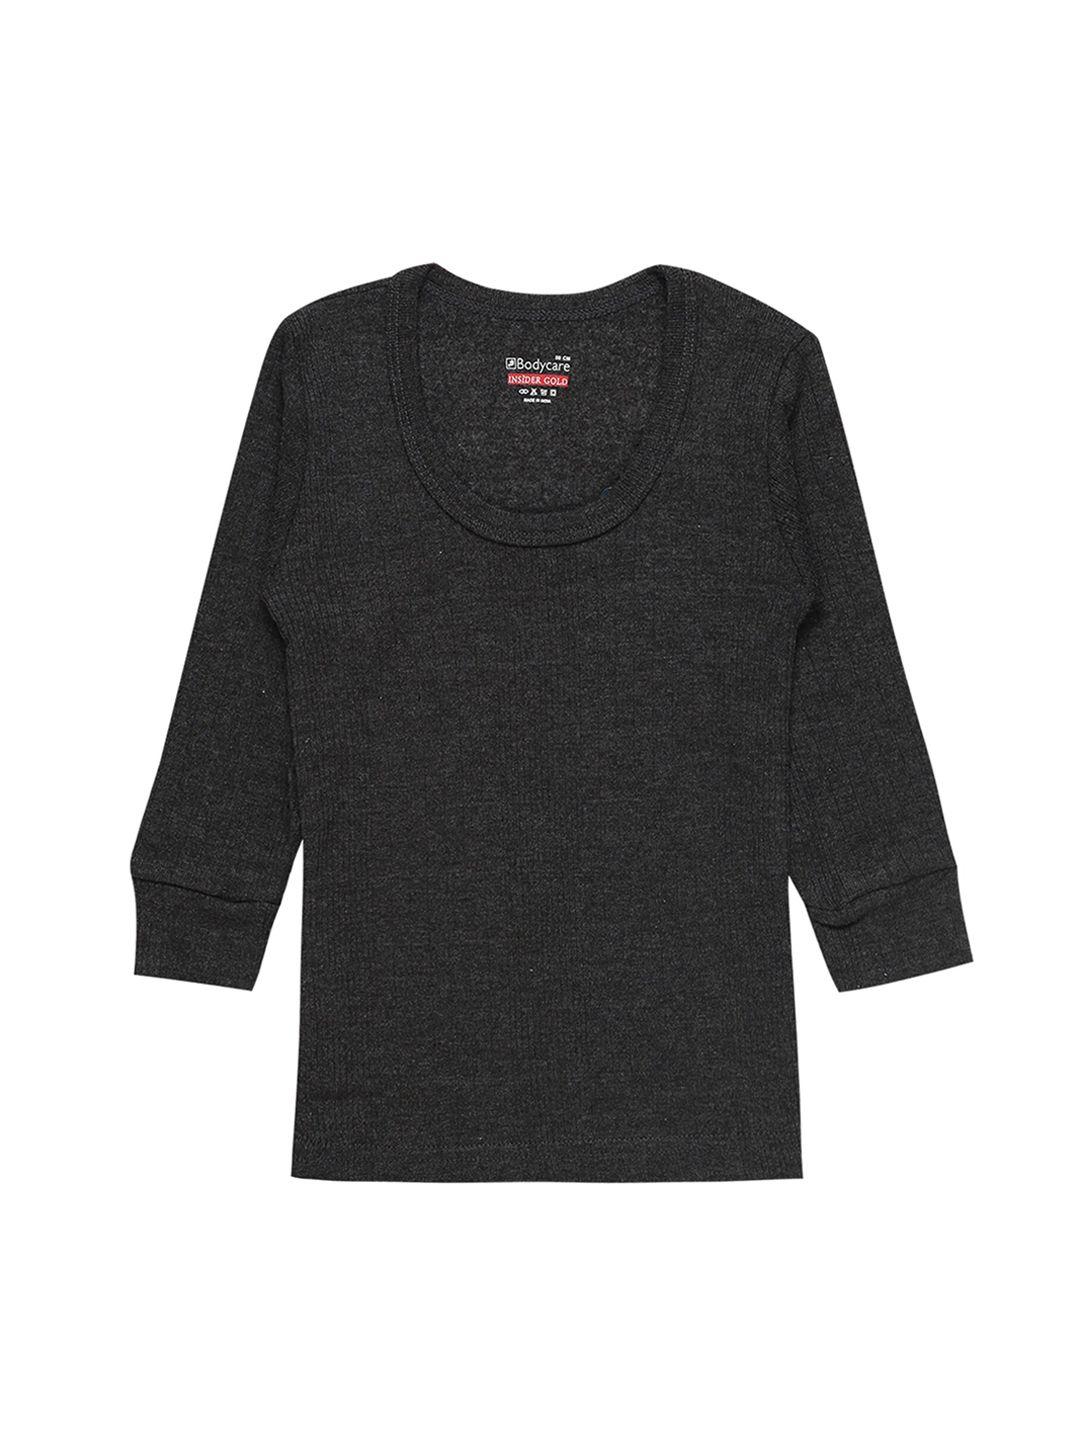 bodycare kids boys grey solid cotton thermal top